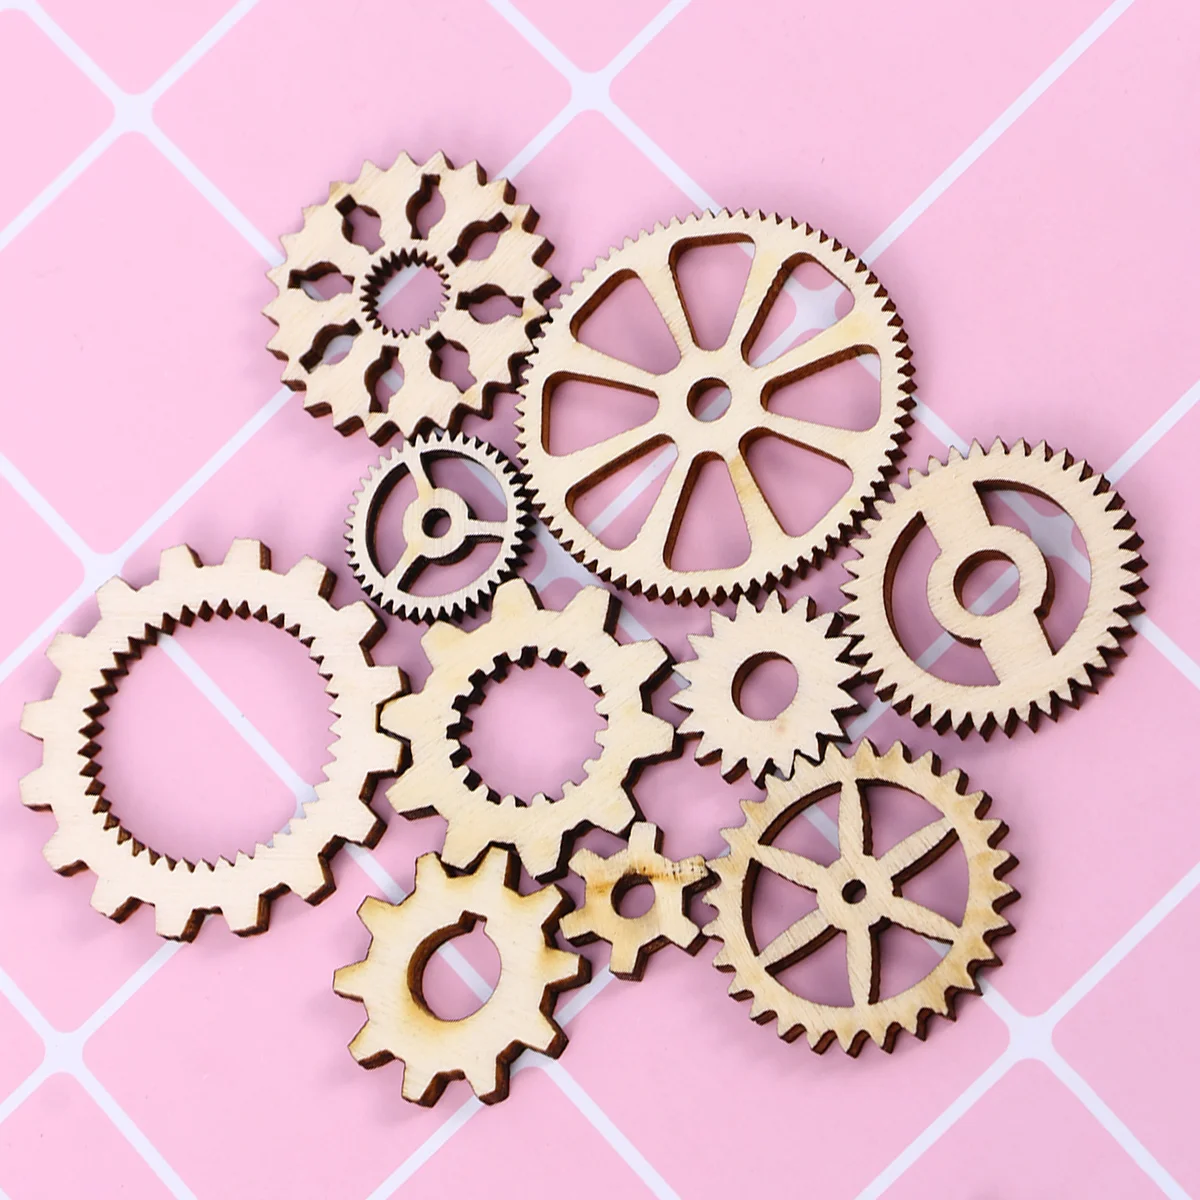 

Gear Wooden Wood Craft Unfinished Ornaments Pieces Diy Chips Cutouts Slices Crafts Embellishments Buttons Wheel Mini Gears